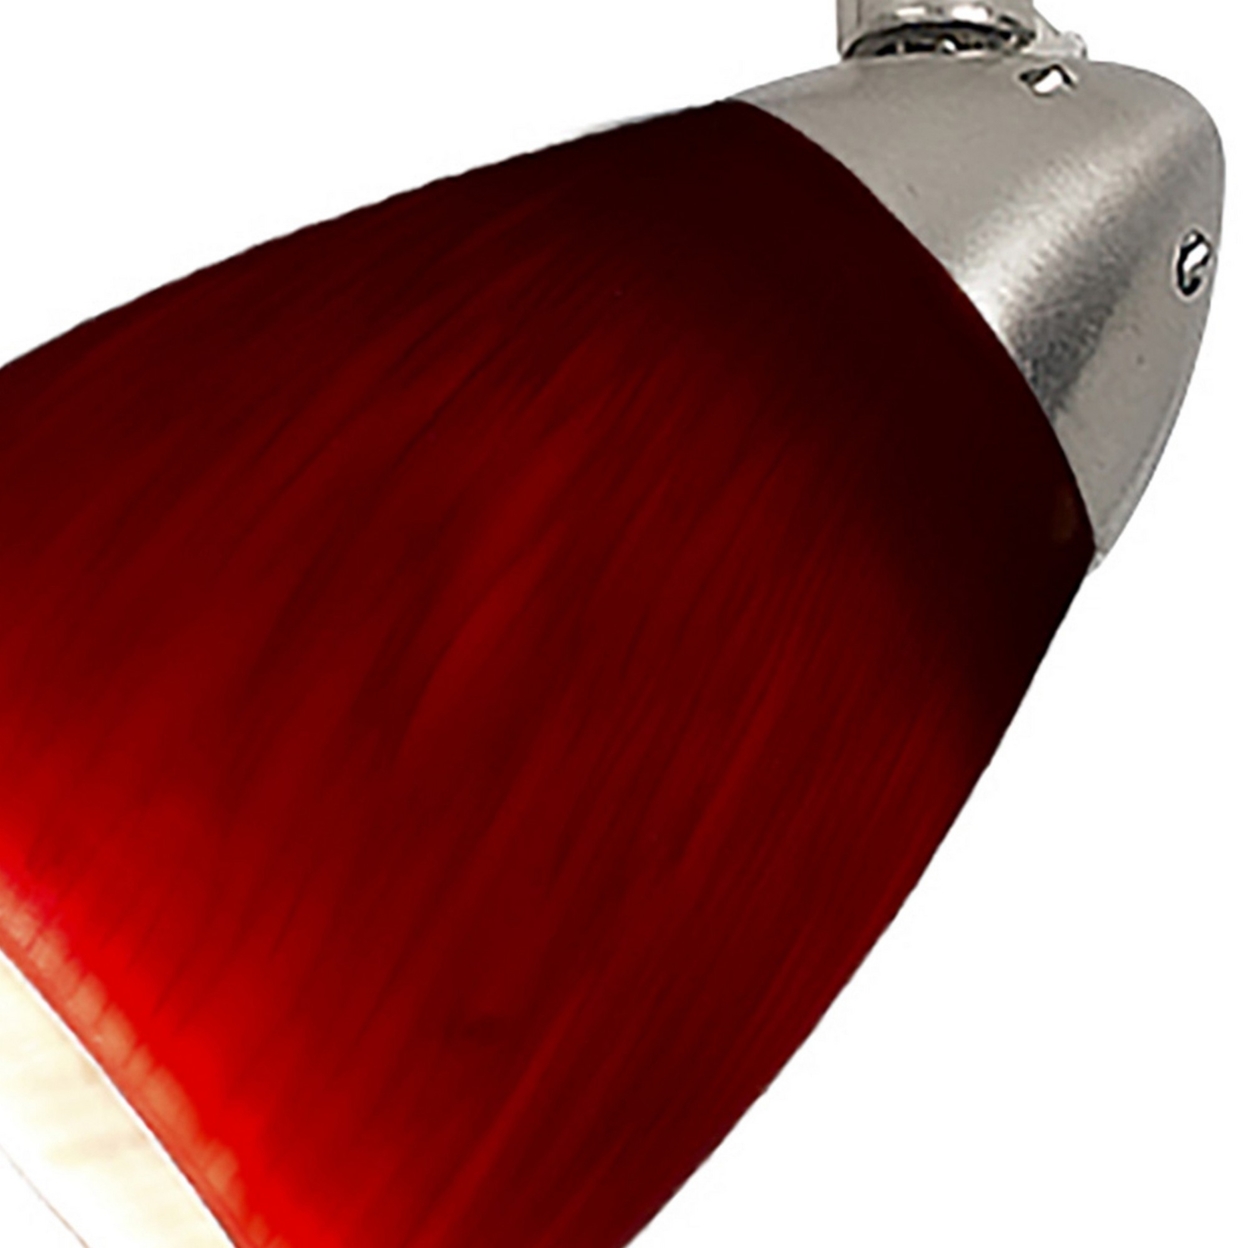 Hand Blown Glass Shade Track Light Head With Metal Frame, Red And Silver- Saltoro Sherpi